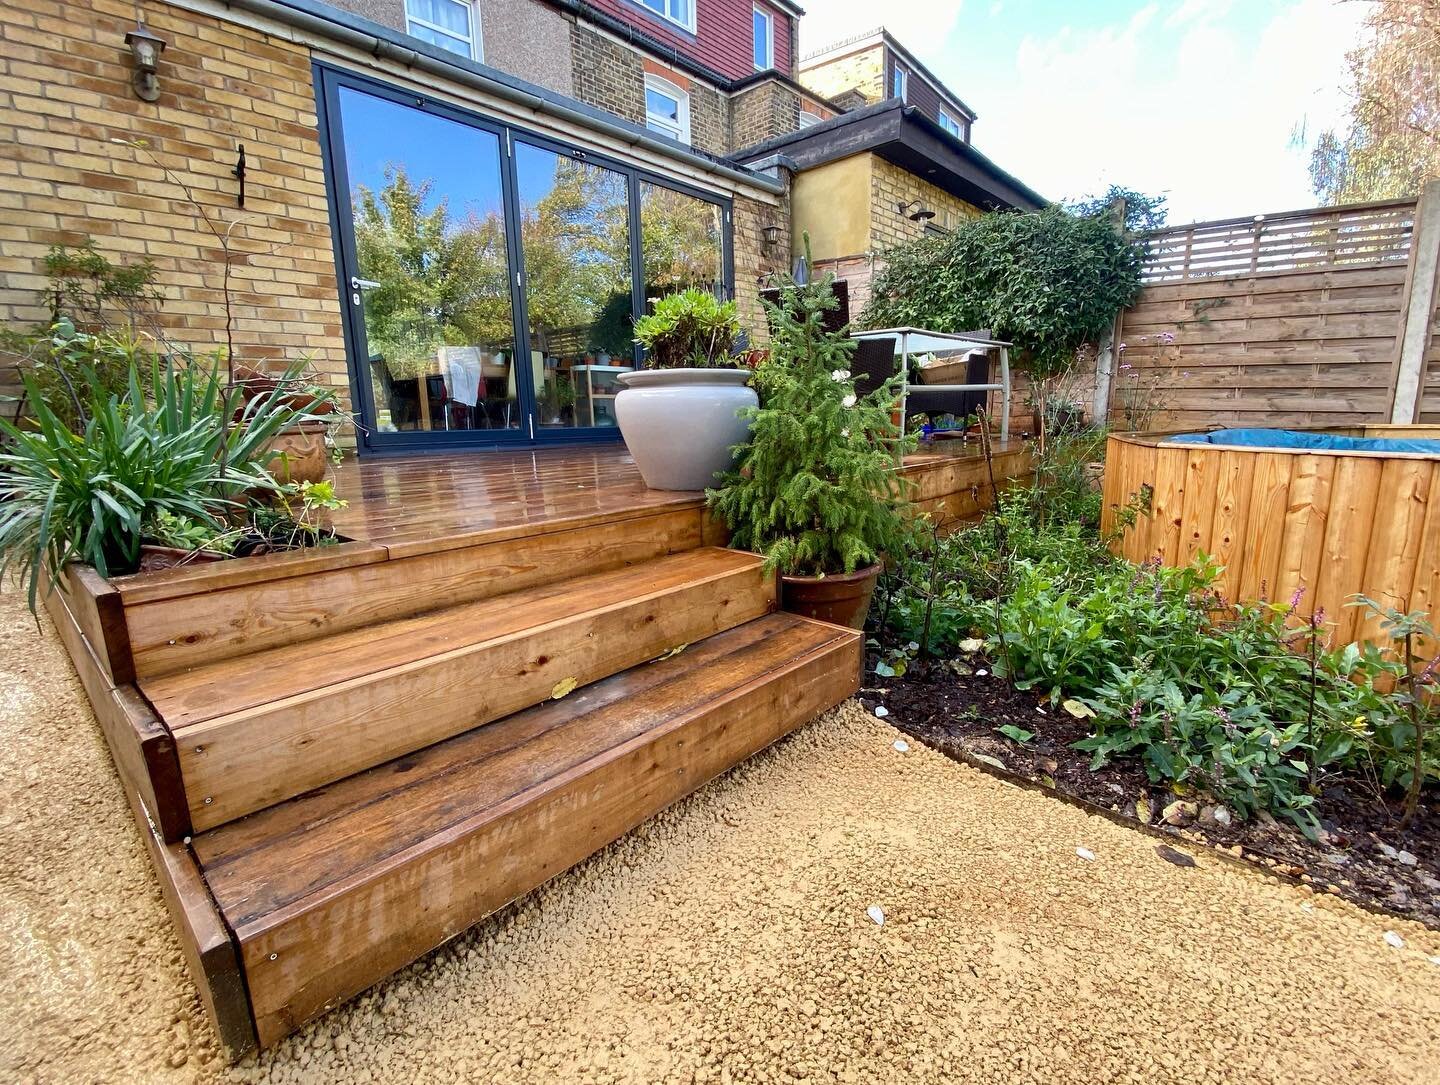 We completed this garden for @ameliahepworthdesign in June but due to the heatwave the planting was delayed and never got photos. We were back to make a few amendments to the hoggin areas and got some shots this time. Raised decking with steps, larch